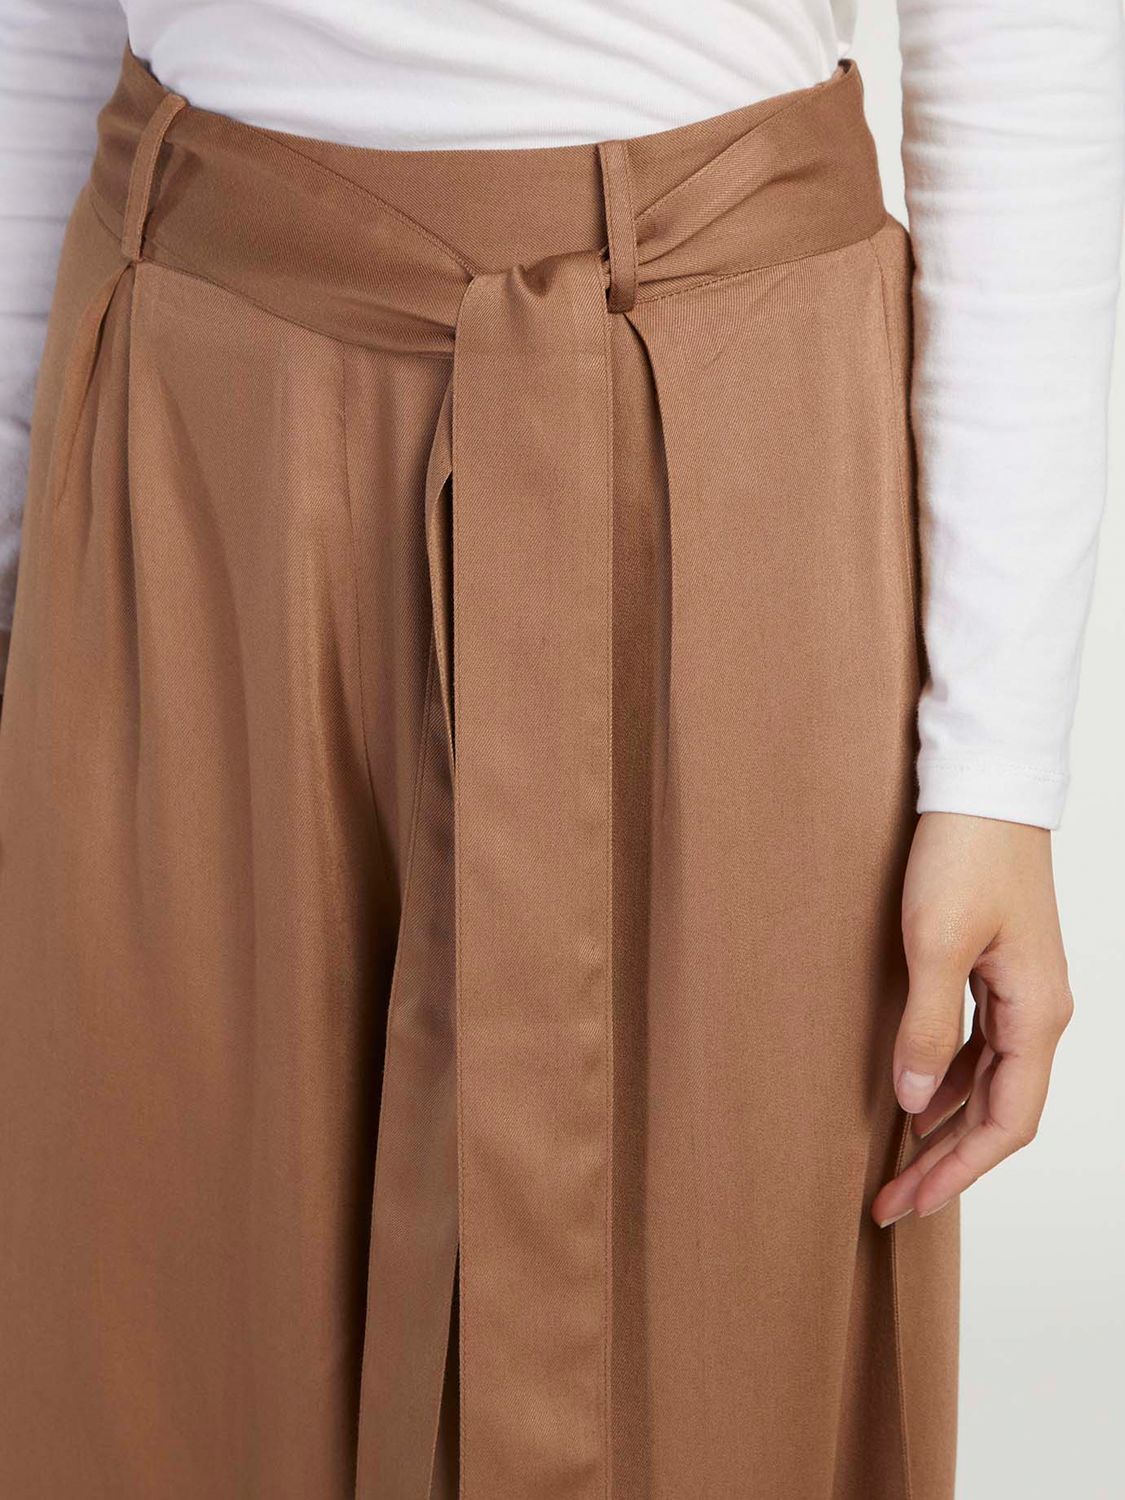 Abercrombie & Fitch wide leg twill pants in camel